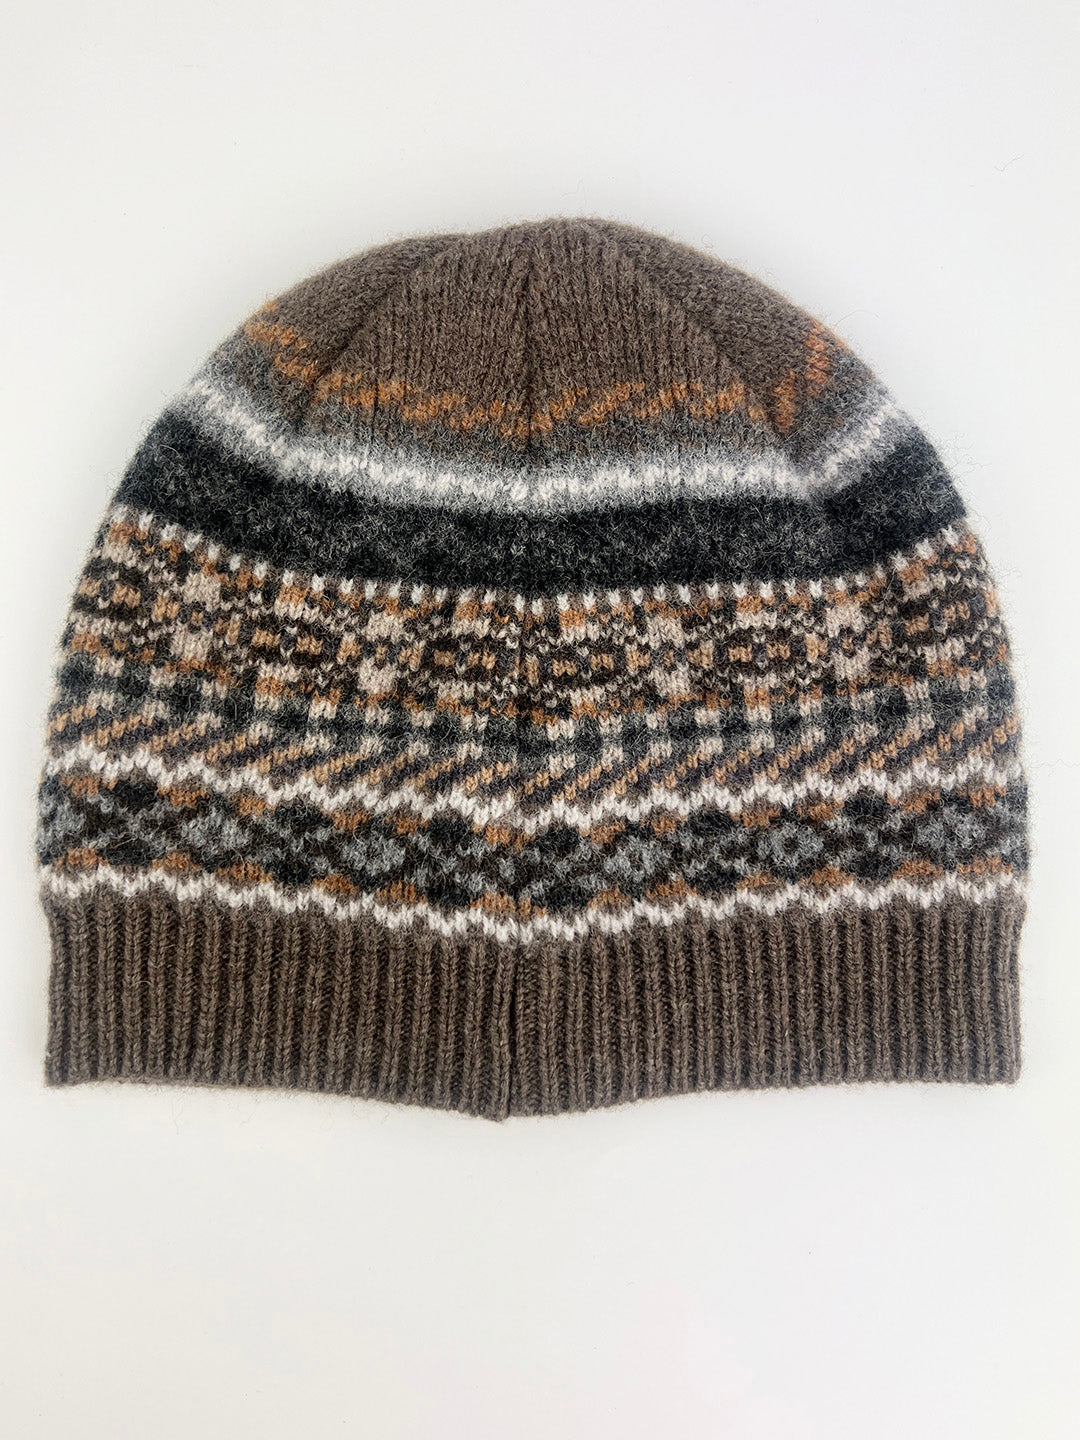 knitted patterned beanie hat in Loam colour way, Knitted in Scotland